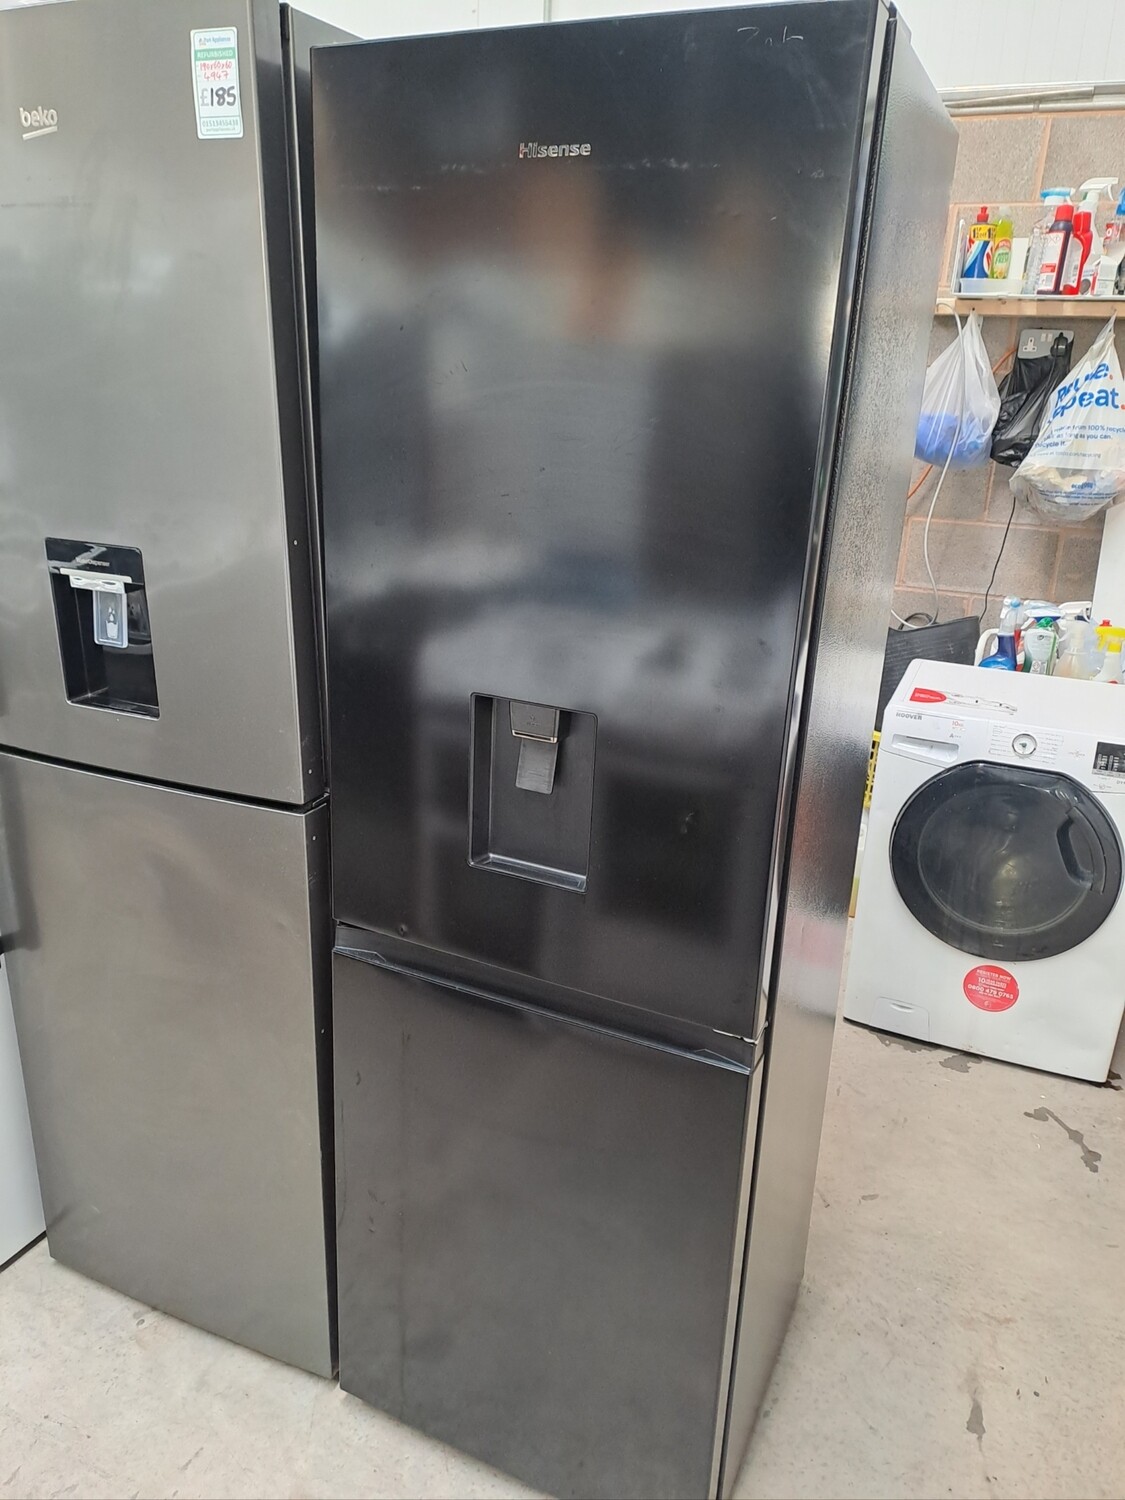 Hisense RB390N4WB1 Fridge Freezer Black 185 x W60 Refurbished 6 Months Guarantee. This item is located in our Whitby Road Shop 